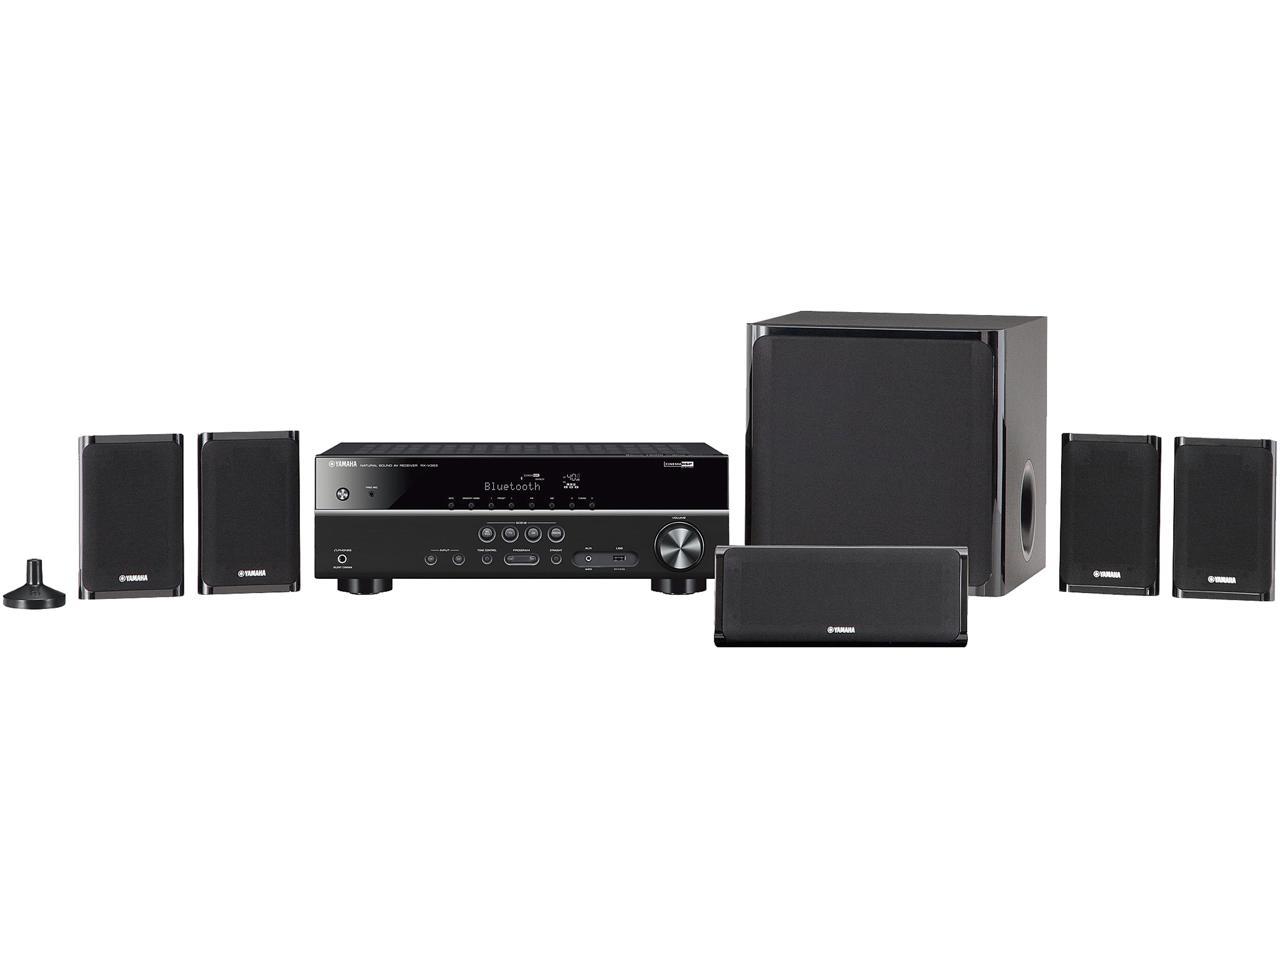 Yamaha YHT-4930UBL 5.1Ch Home Theater in a Box System